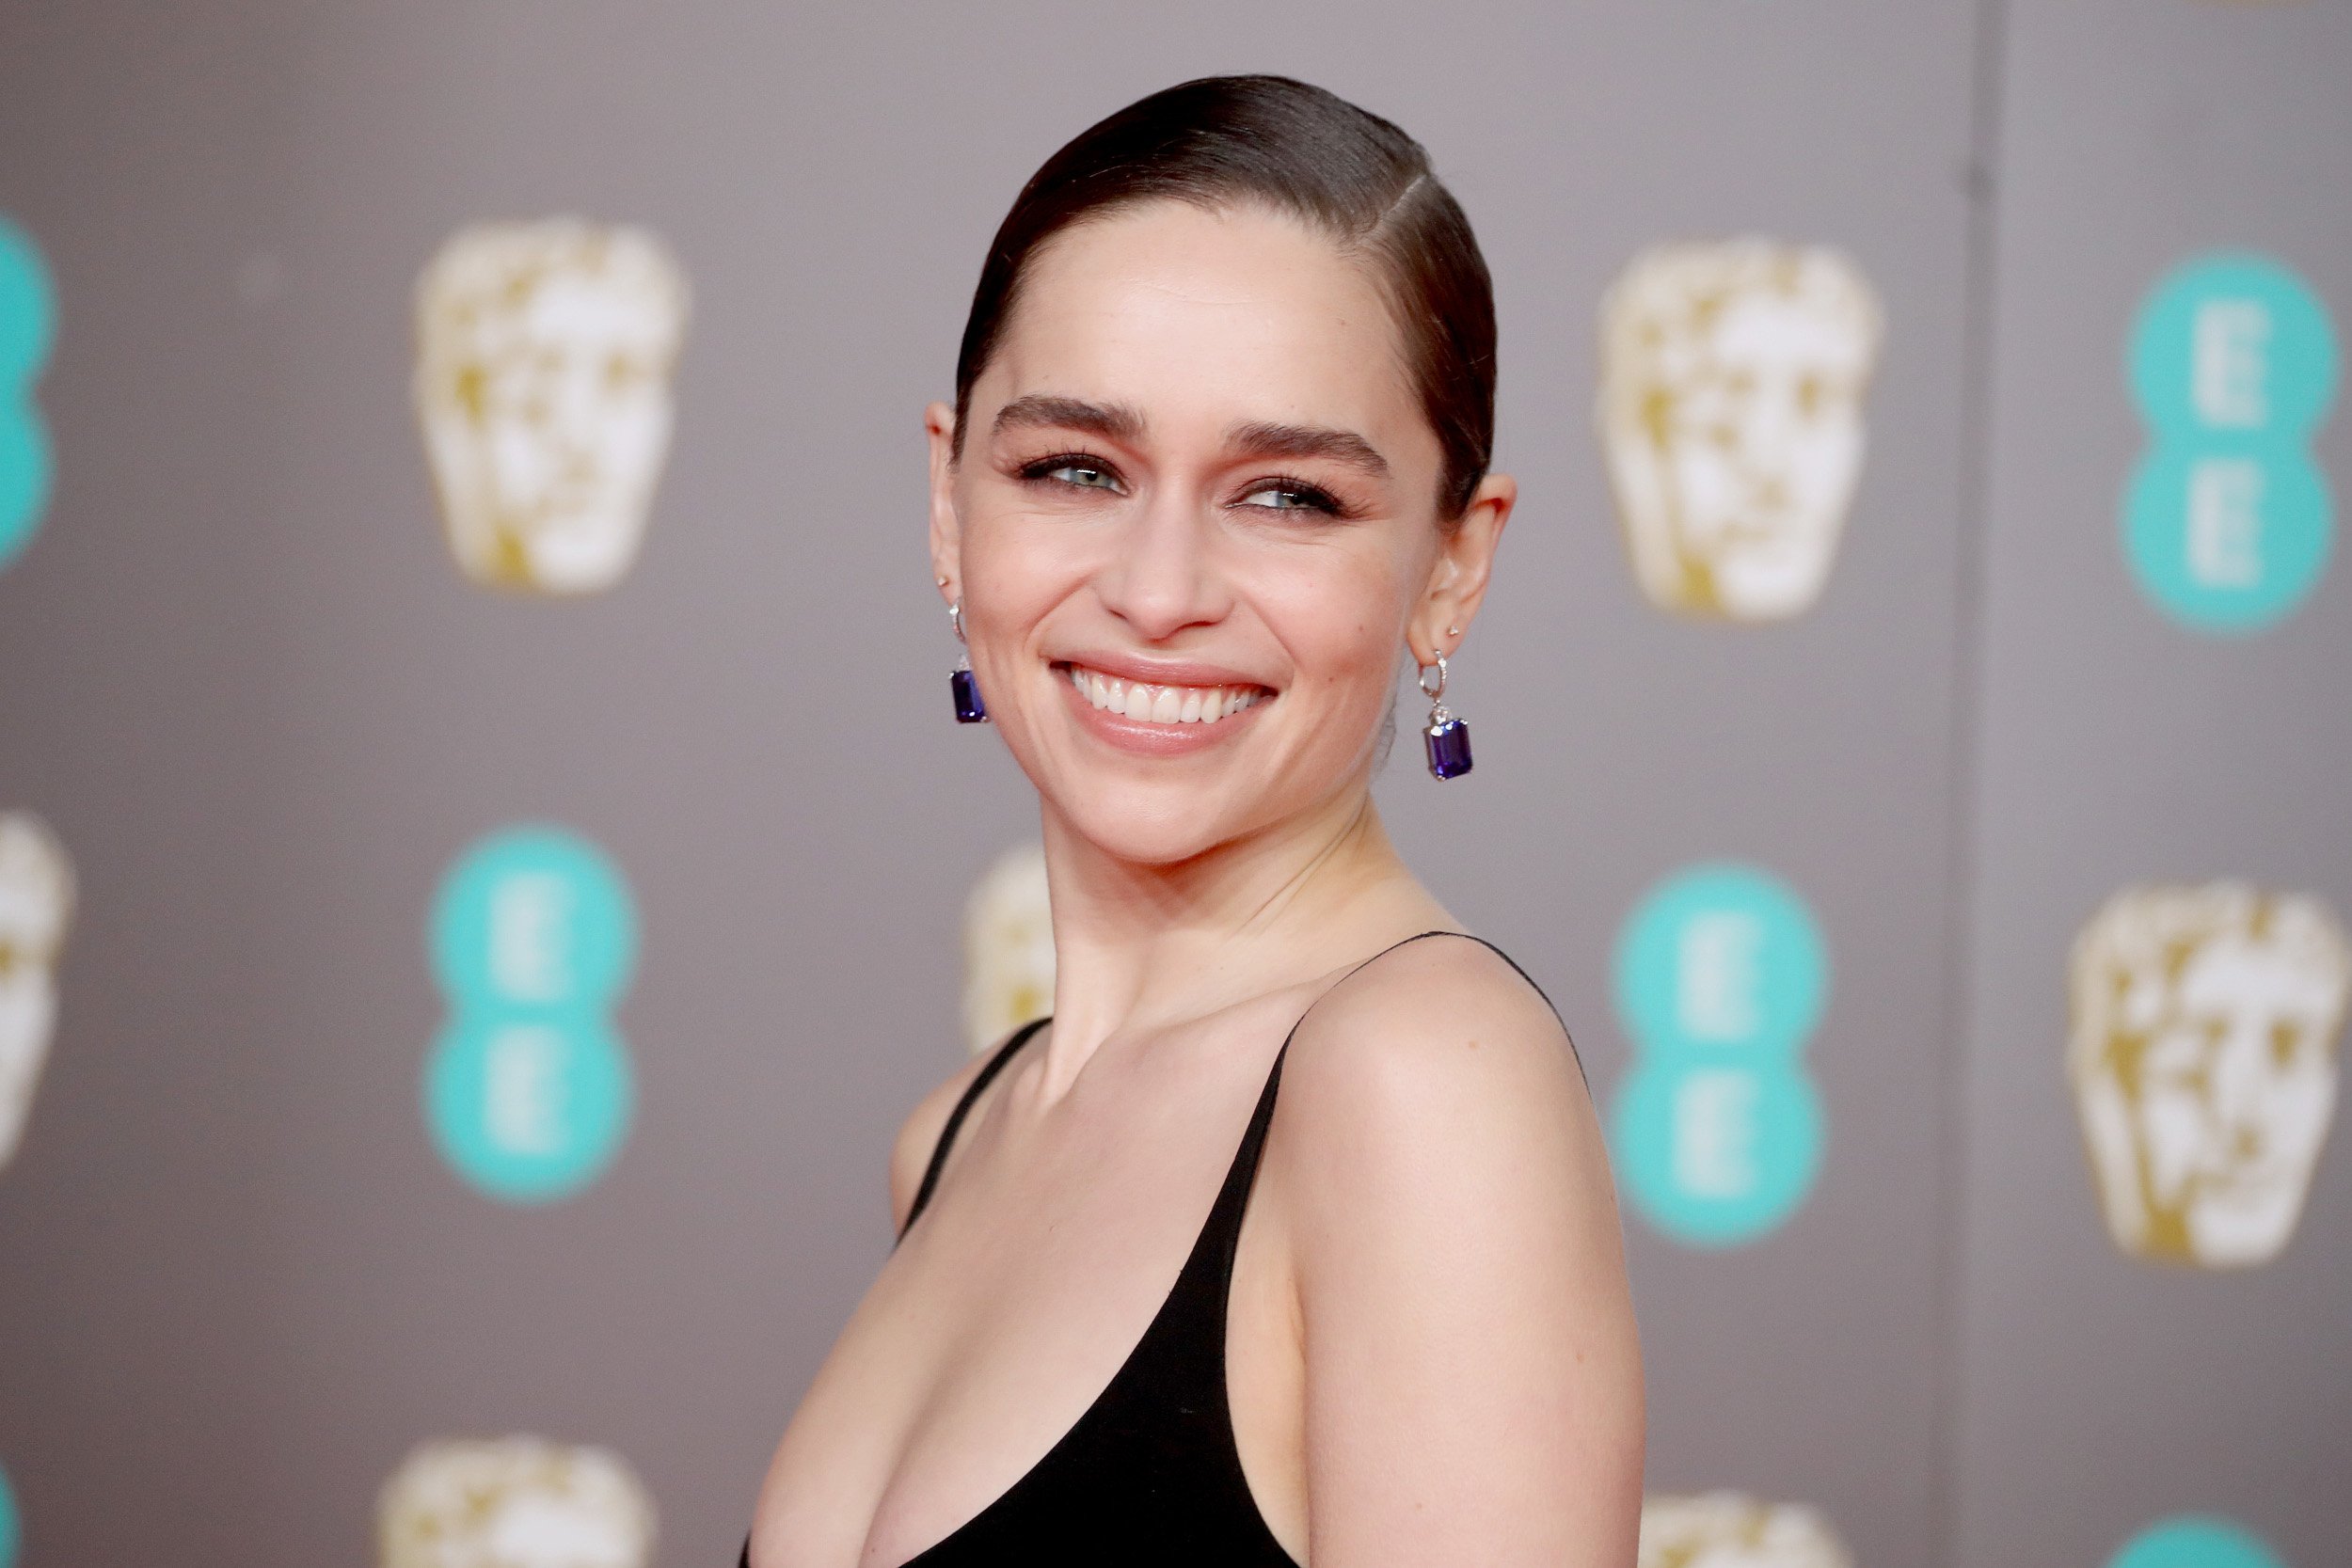 Emilia Clarke with her hair pulled back and wearing a black dress at the EE British Academy Film Awards